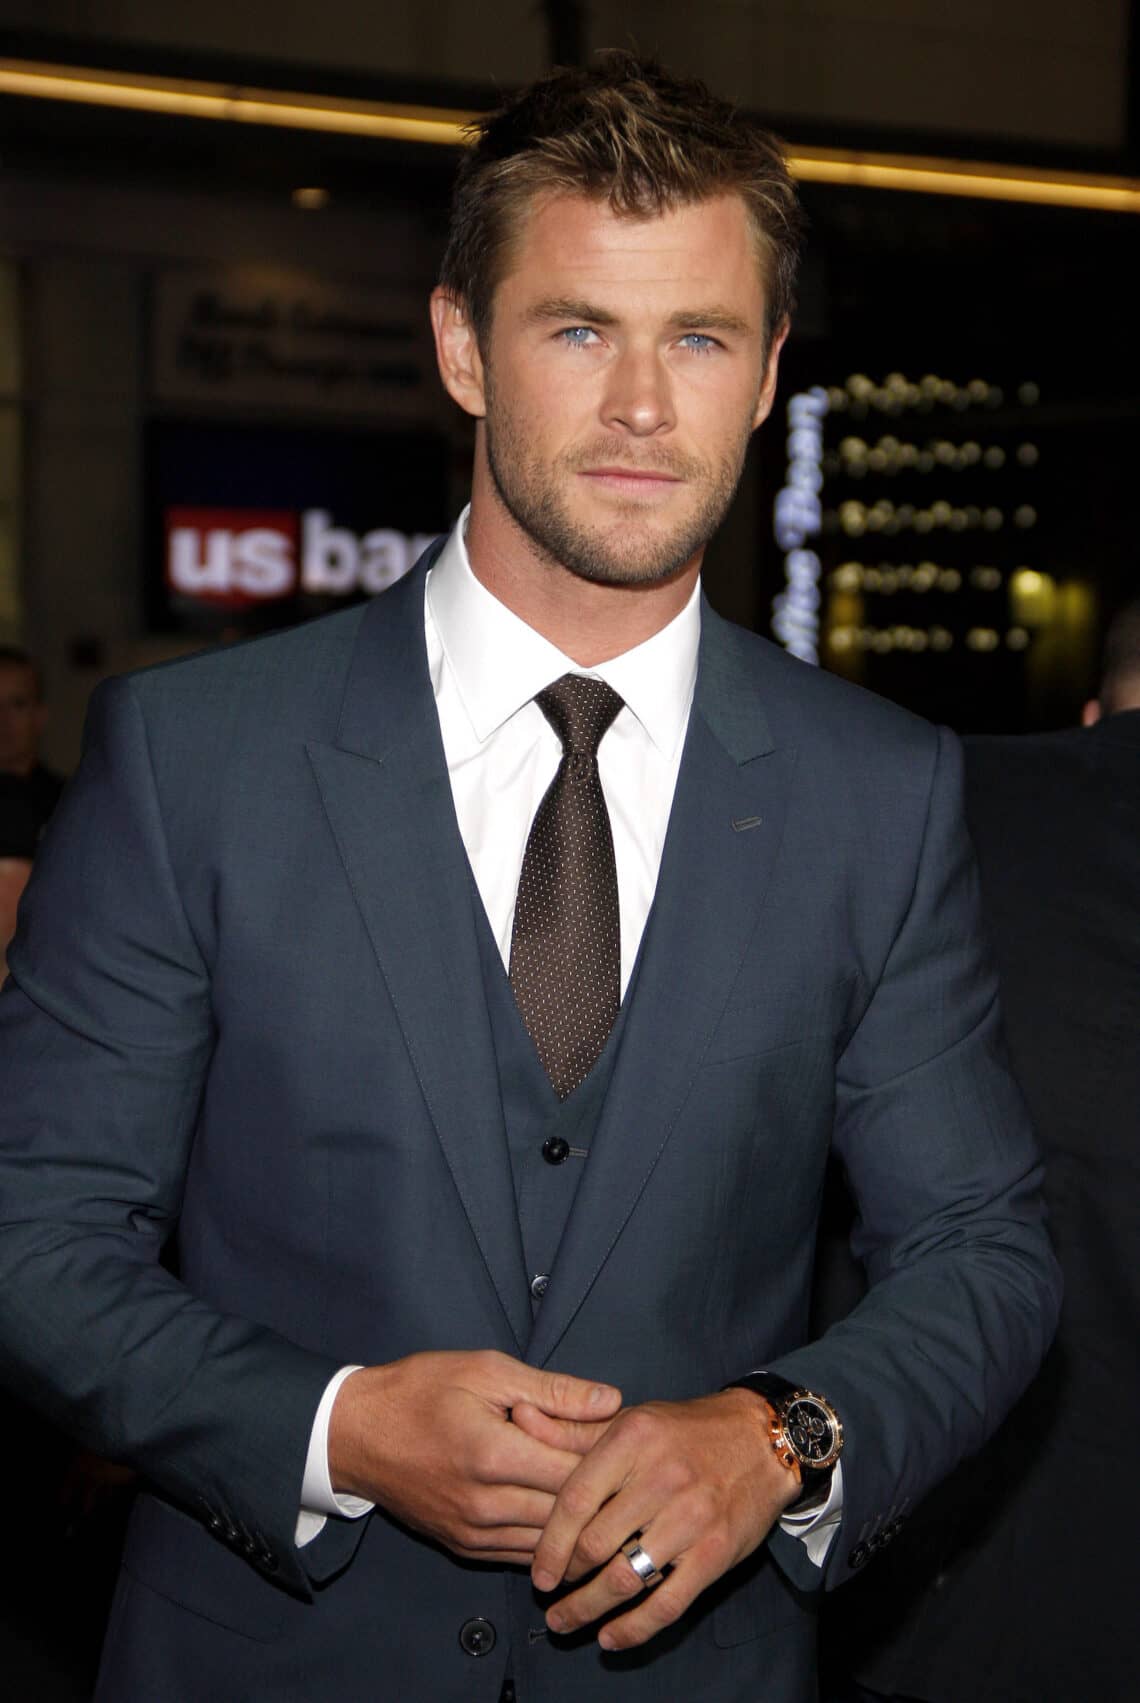 Is Chris Hemsworth Right or Left-Handed?